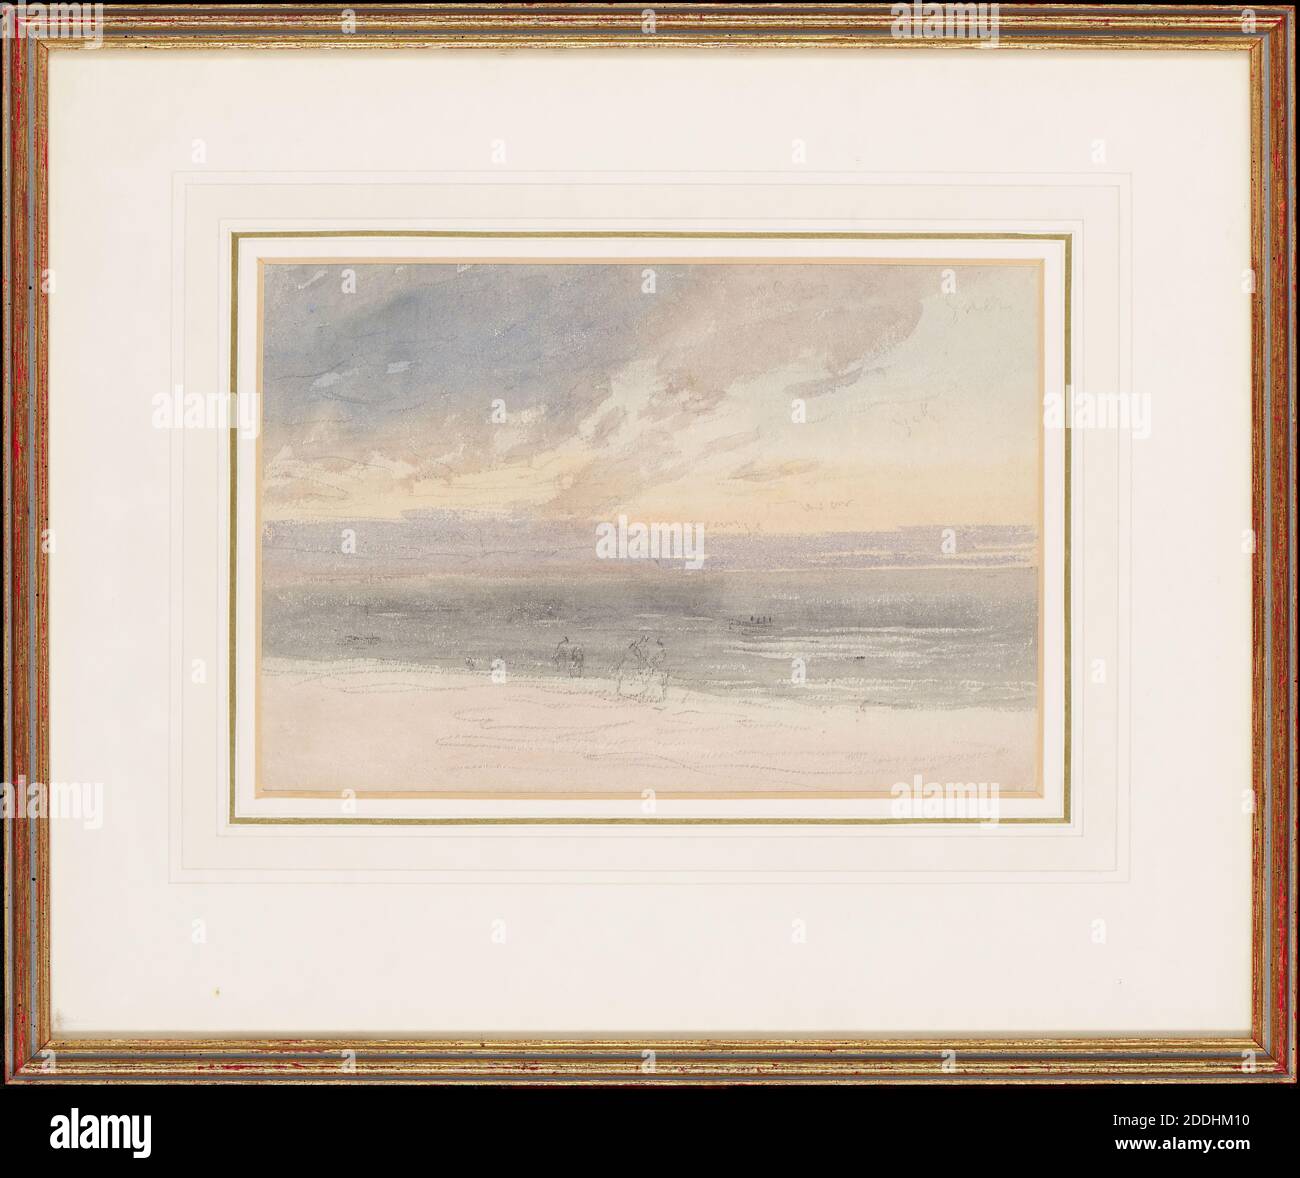 Sunset From The Shore, 1783-1859 David Cox (d.1859), 19th Century, 18th Century, Watercolour, Frame, Shore, Sunset, Works on Paper Stock Photo